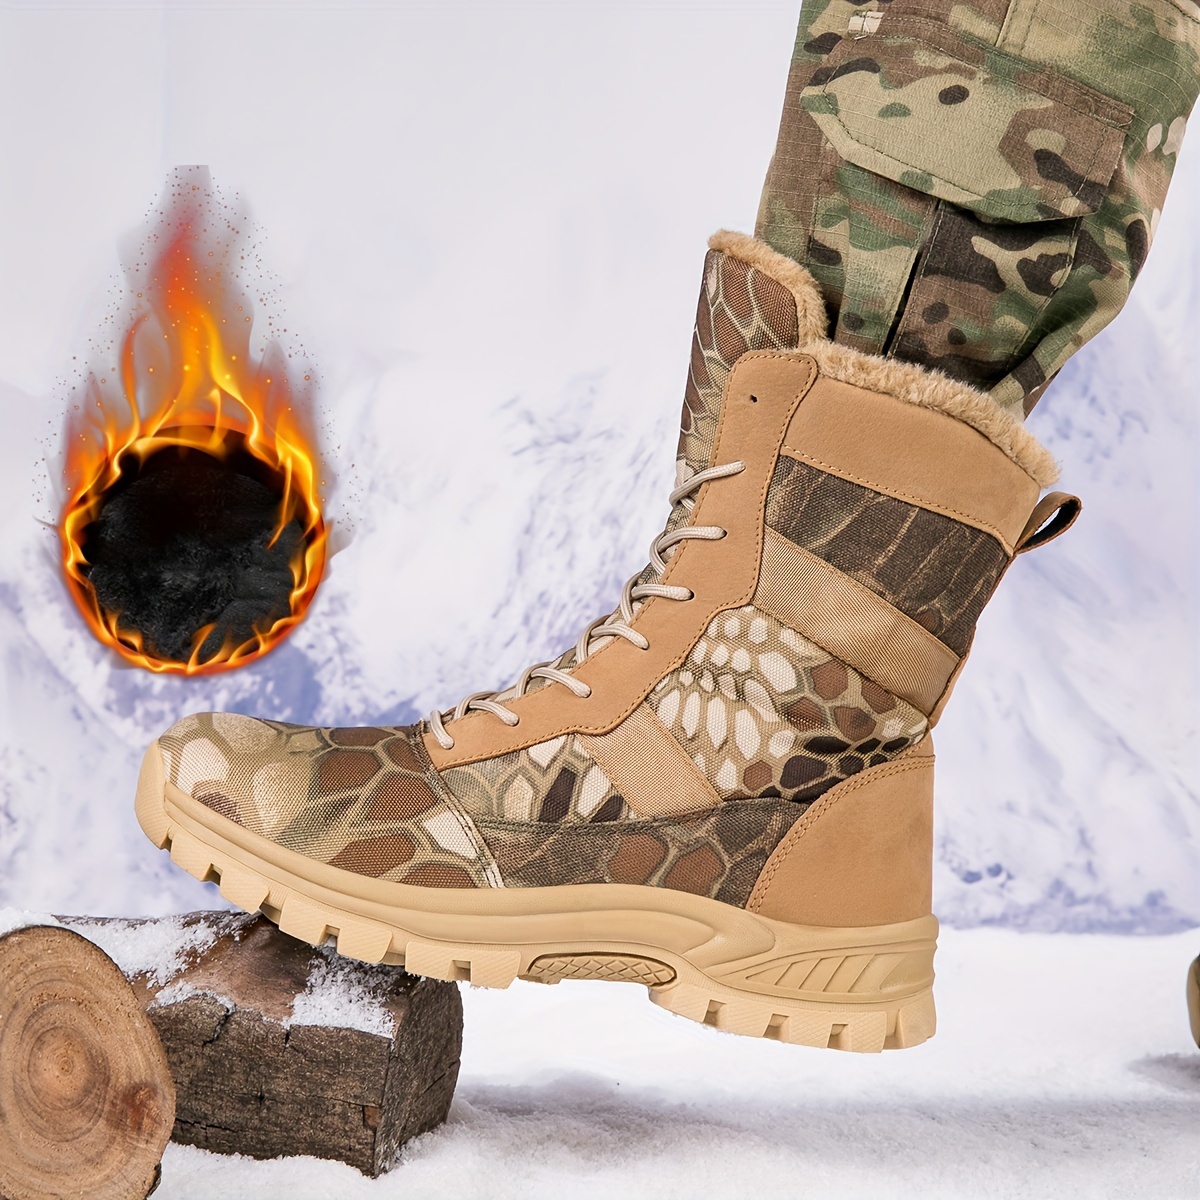 A Tactical Boot Made for Civilians That's Hard-Core Enough for Marines